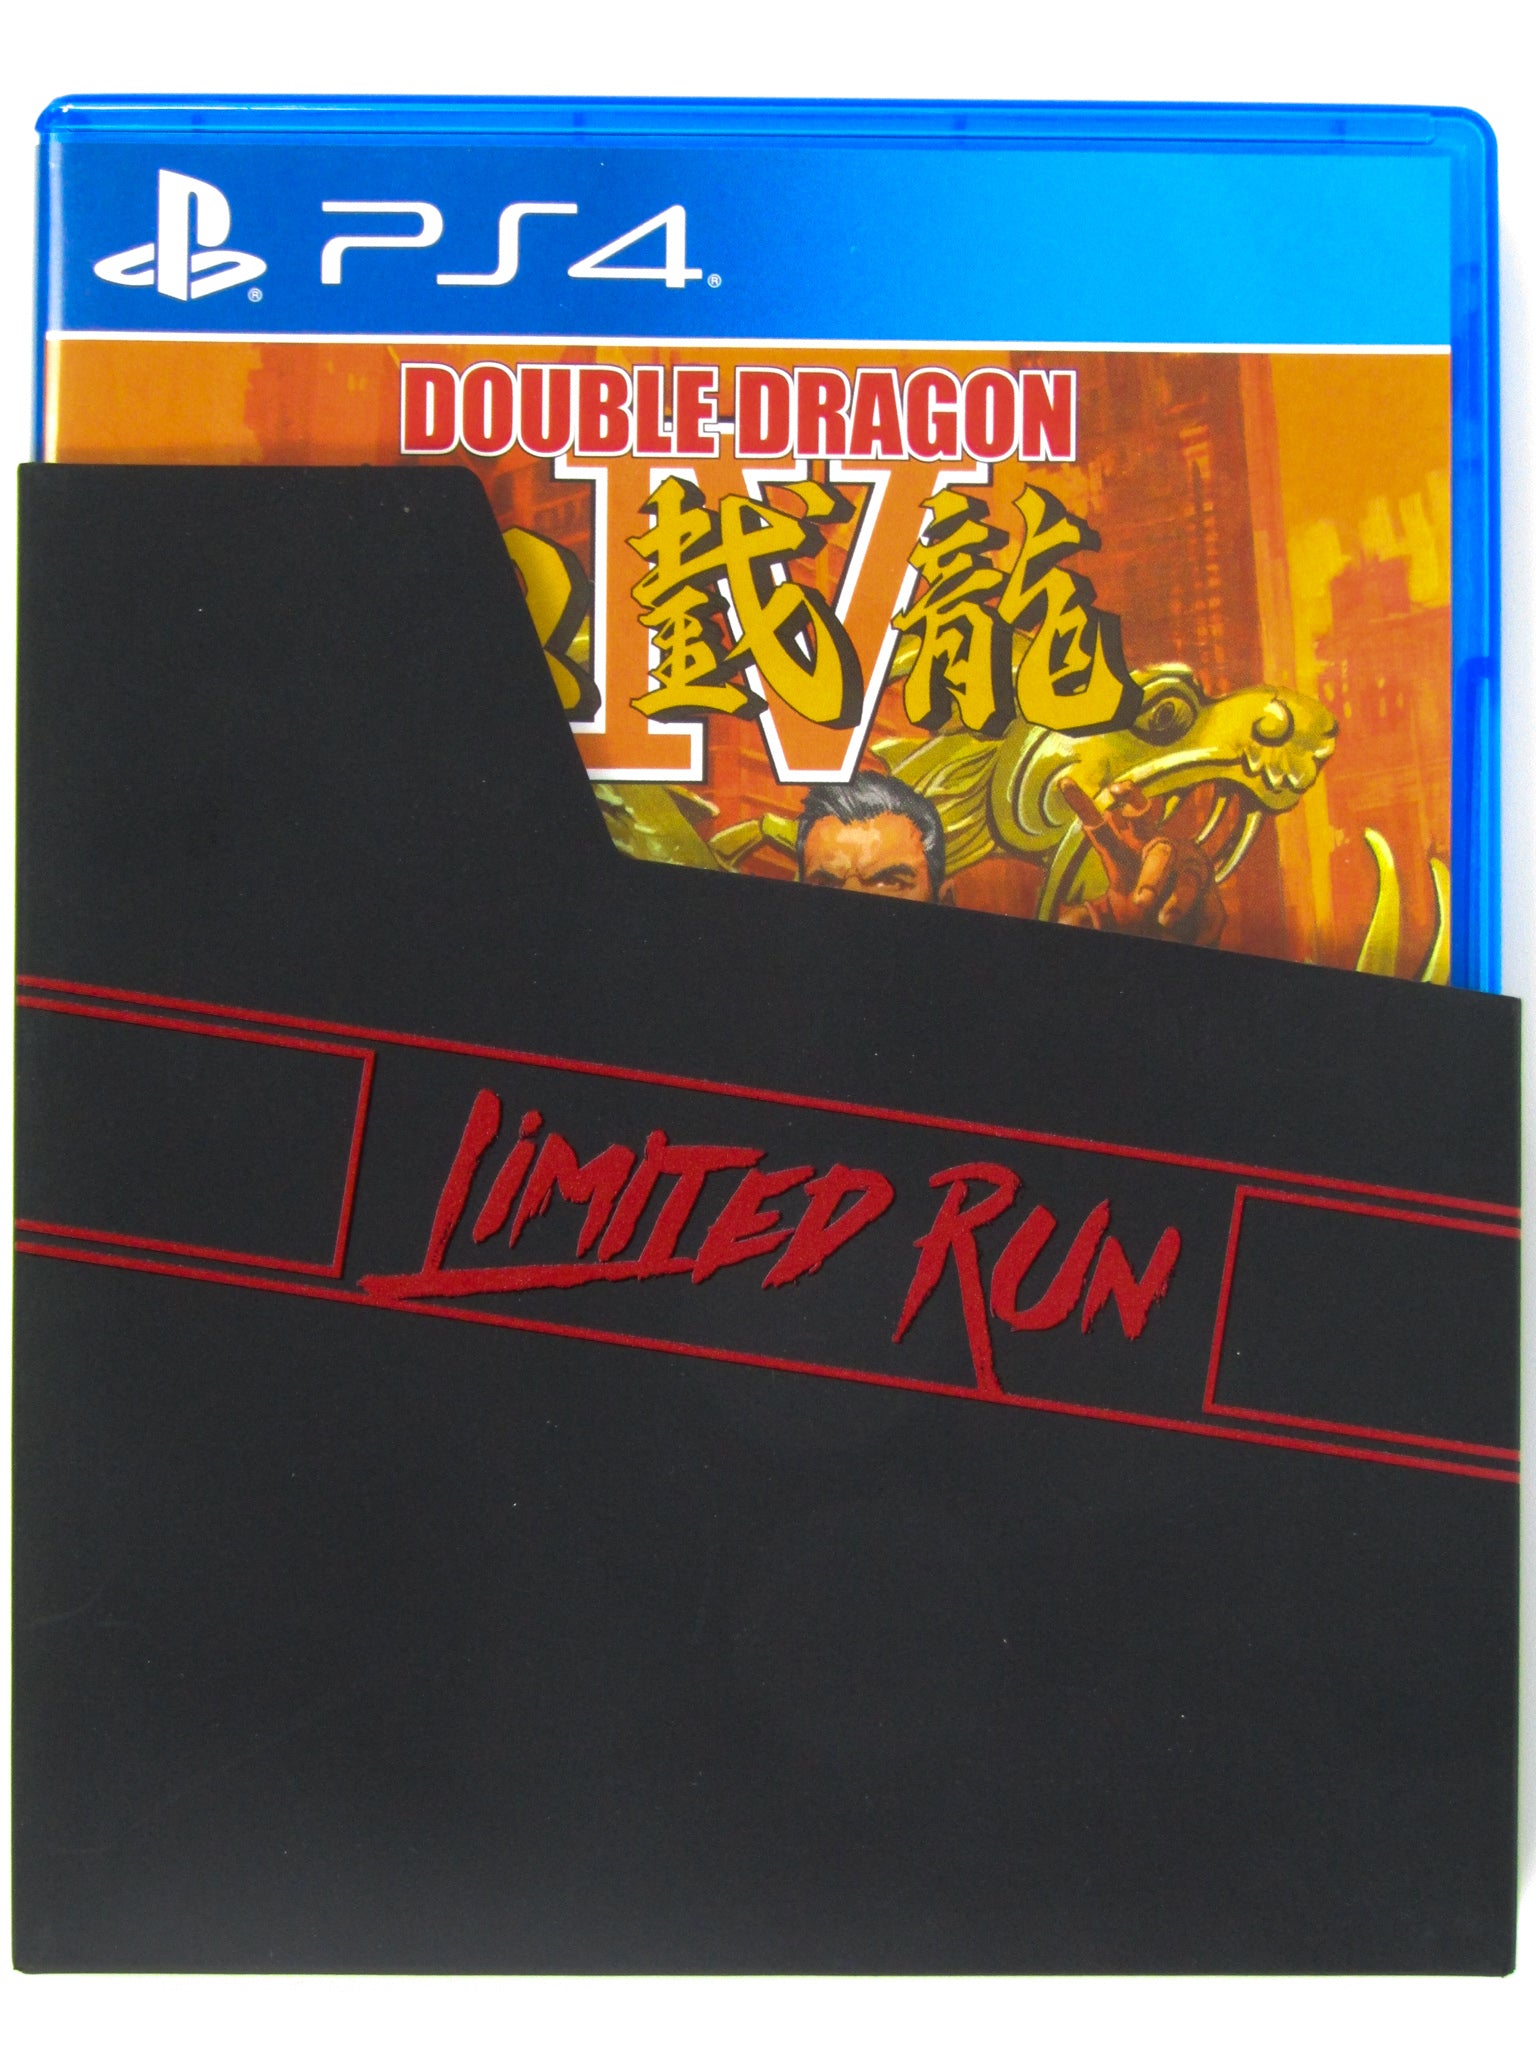 New Double Dragon IV 4 Classic Edition Limited Run Games (LRG) PS4 with  Card